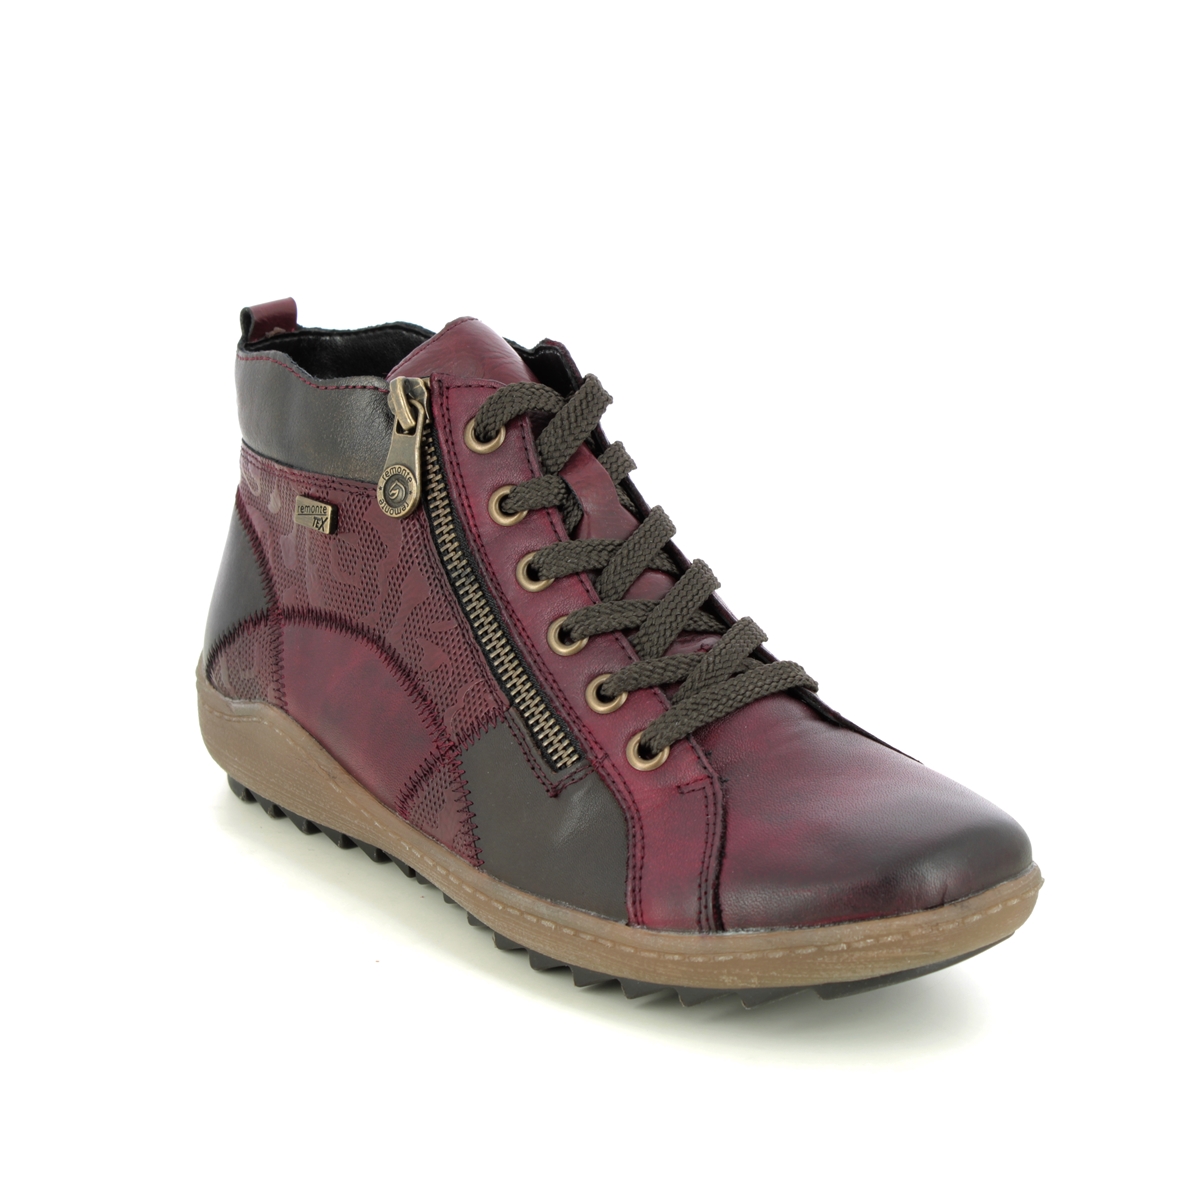 Remonte Zigseipatch Tex Wine Womens Hi Tops R1467-35 In Size 39 In Plain Wine